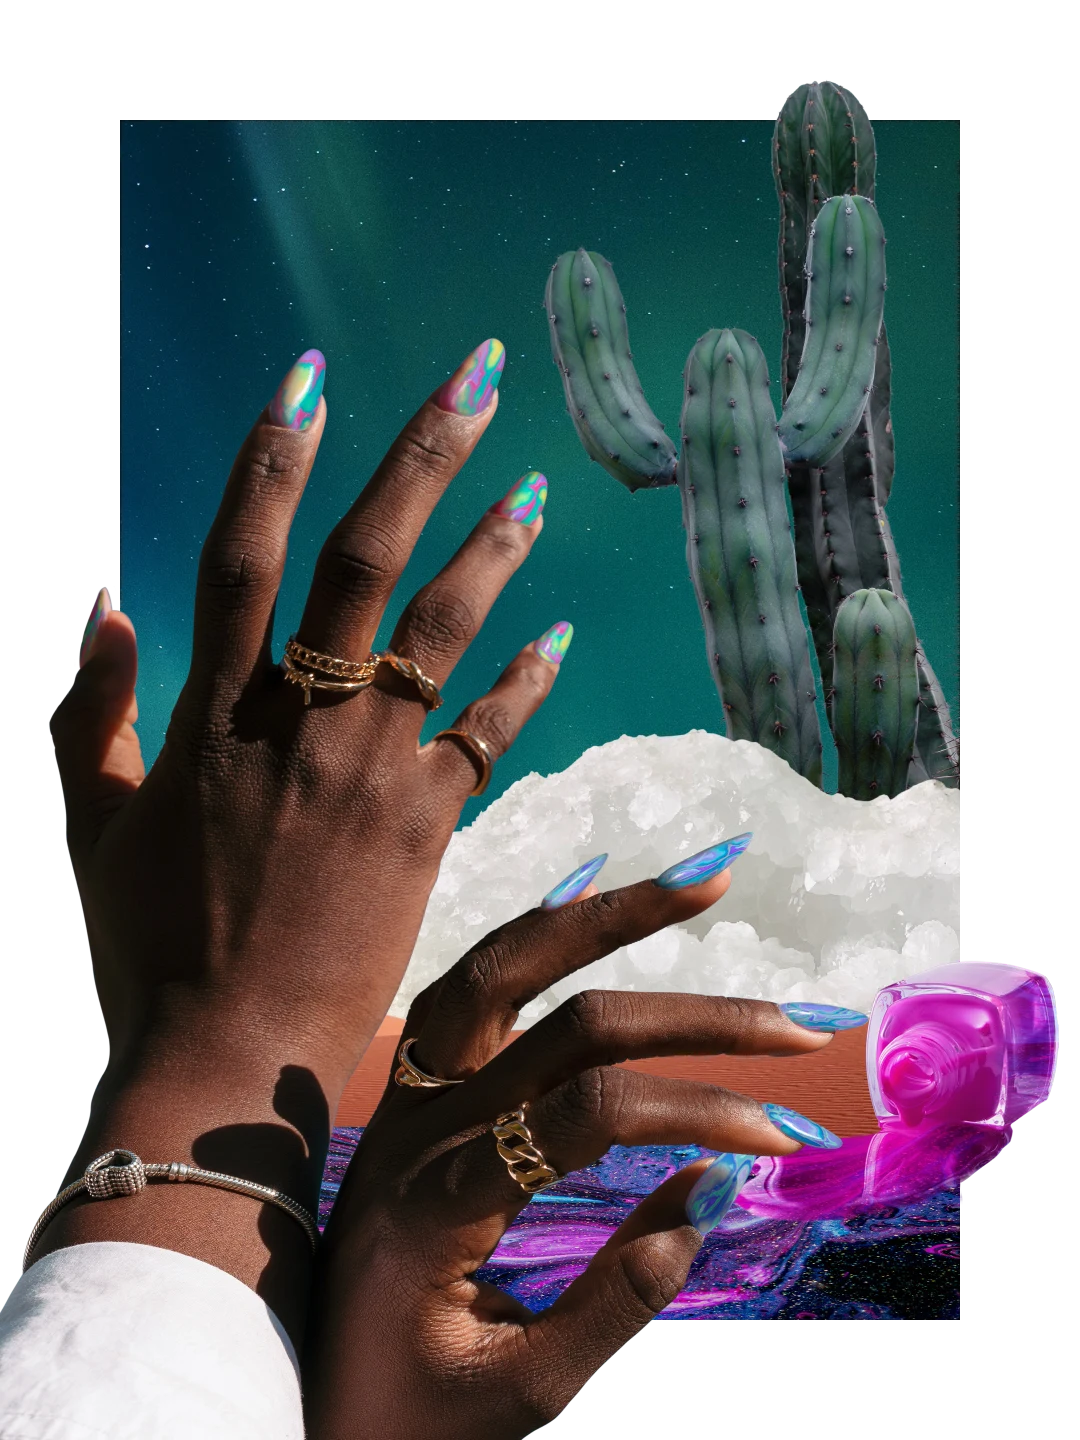 Collage of nail-themed items. Blue, pink and purple spill from a bottle of nail polish on the right. Black woman’s hands with multicolored fingernails on the left. Large cactus on the upper right, salt crystals underneath.
